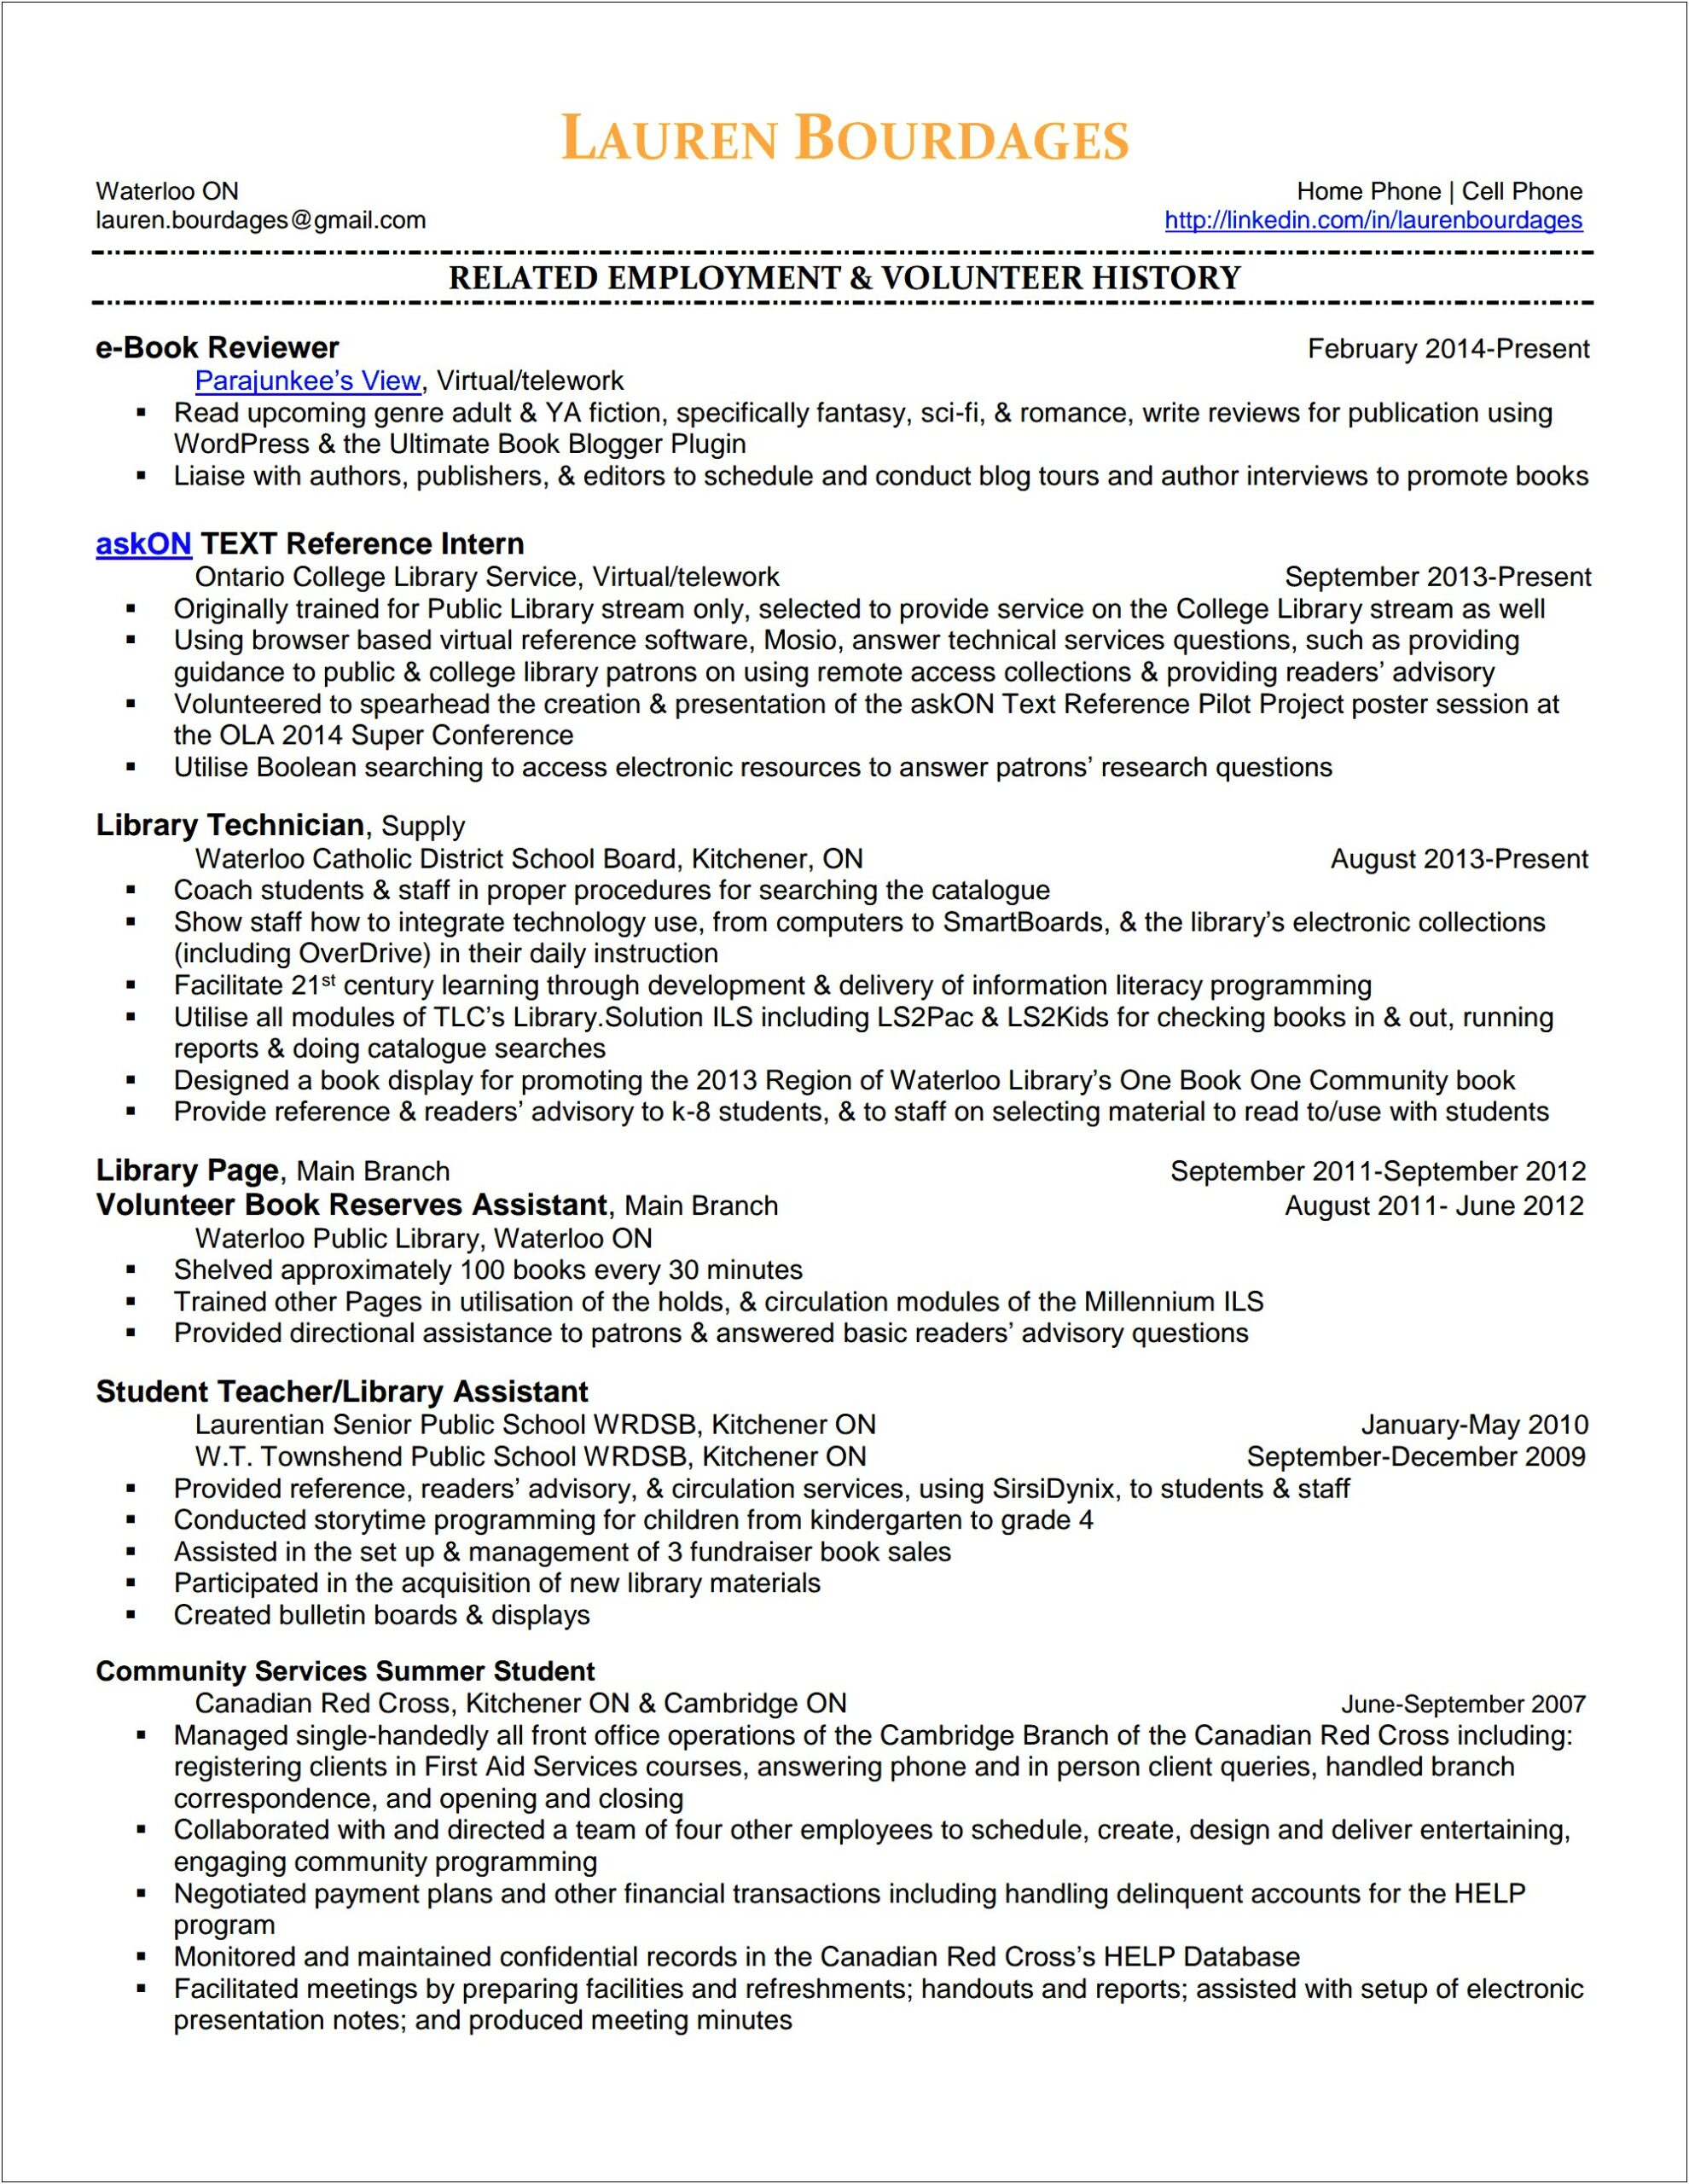 Resume Objective Statements For Library Assistant